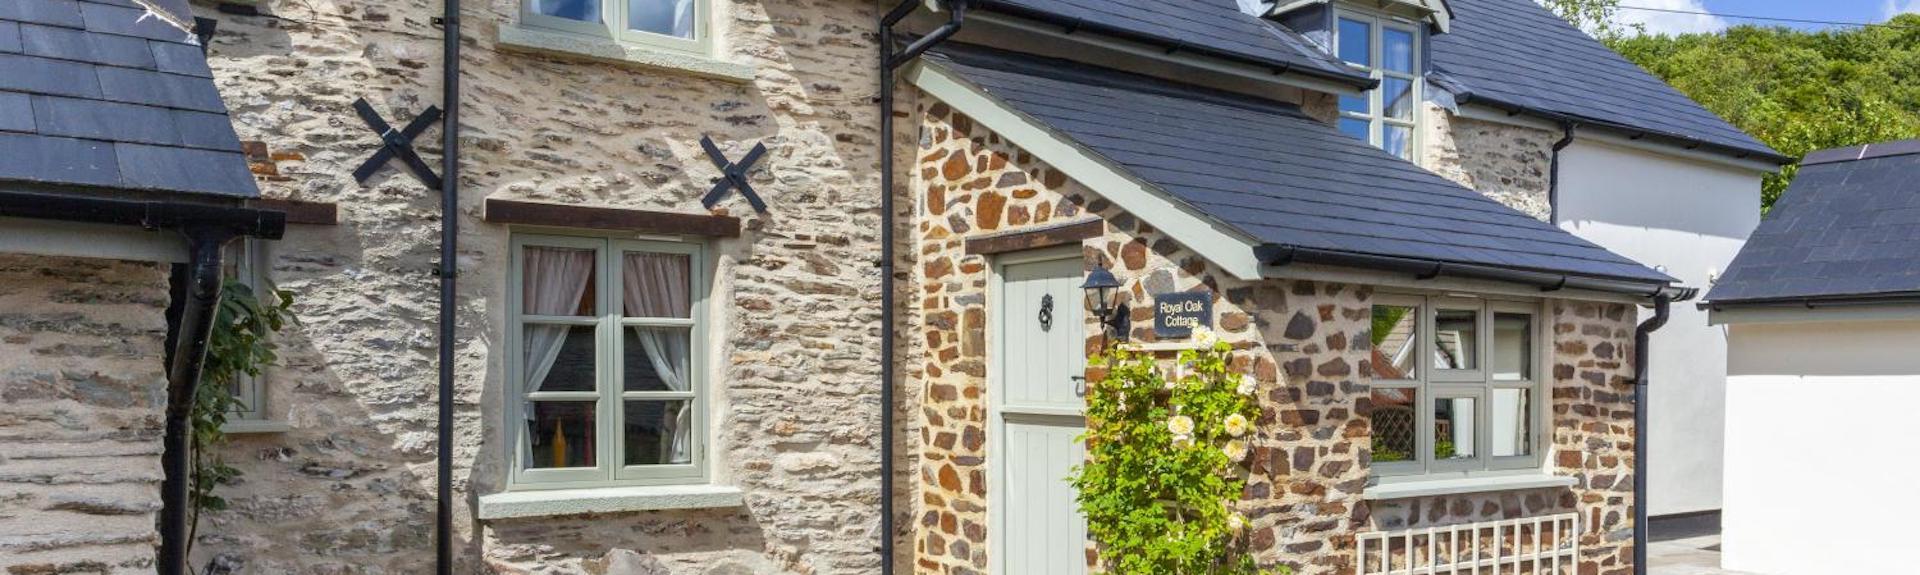 Exterior of a traditional stone-built Exmoor cottage overlooking a quiet village lane.